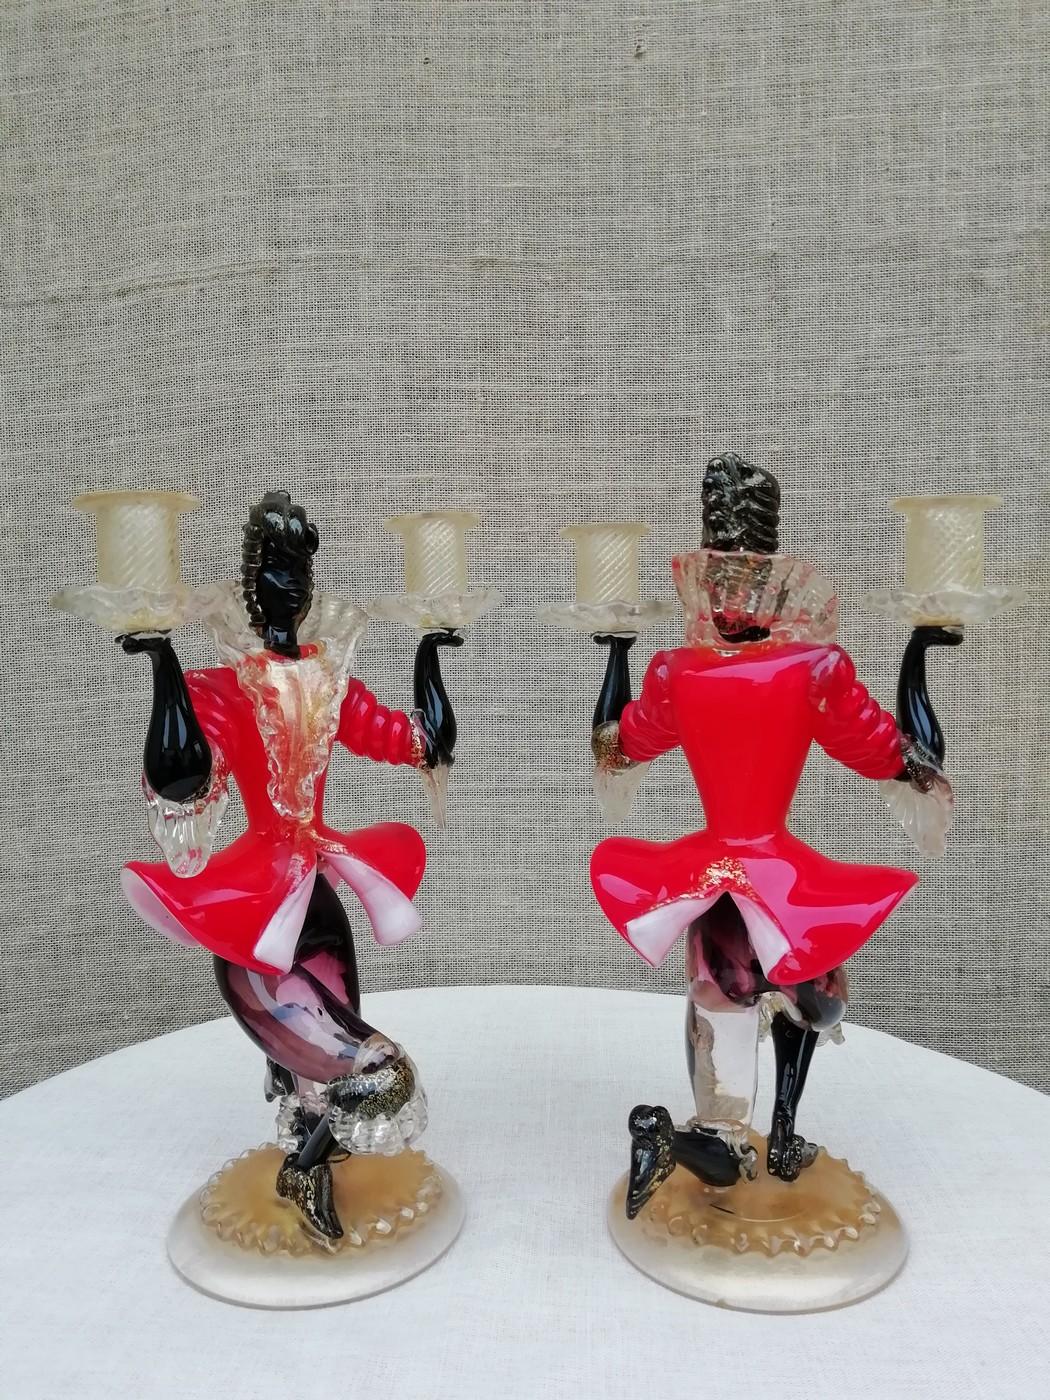 Pair of spun glass candleholders representing two figures wearing red 18th century period outfits. Kneeling on a gilded base, they hold a candle in each of their hands.
Italy Venice, circa 1950.